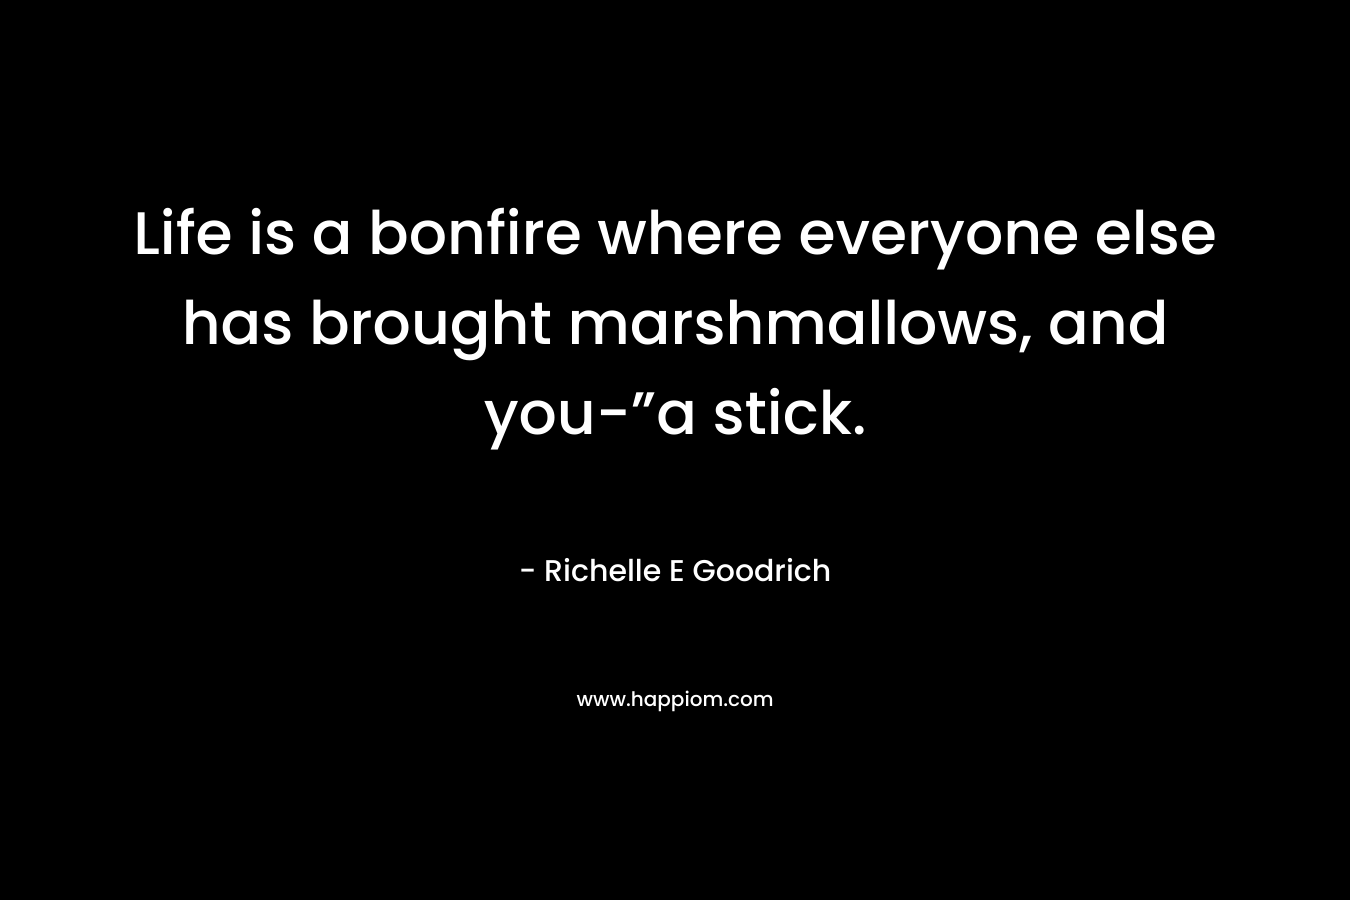 Life is a bonfire where everyone else has brought marshmallows, and you-”a stick.